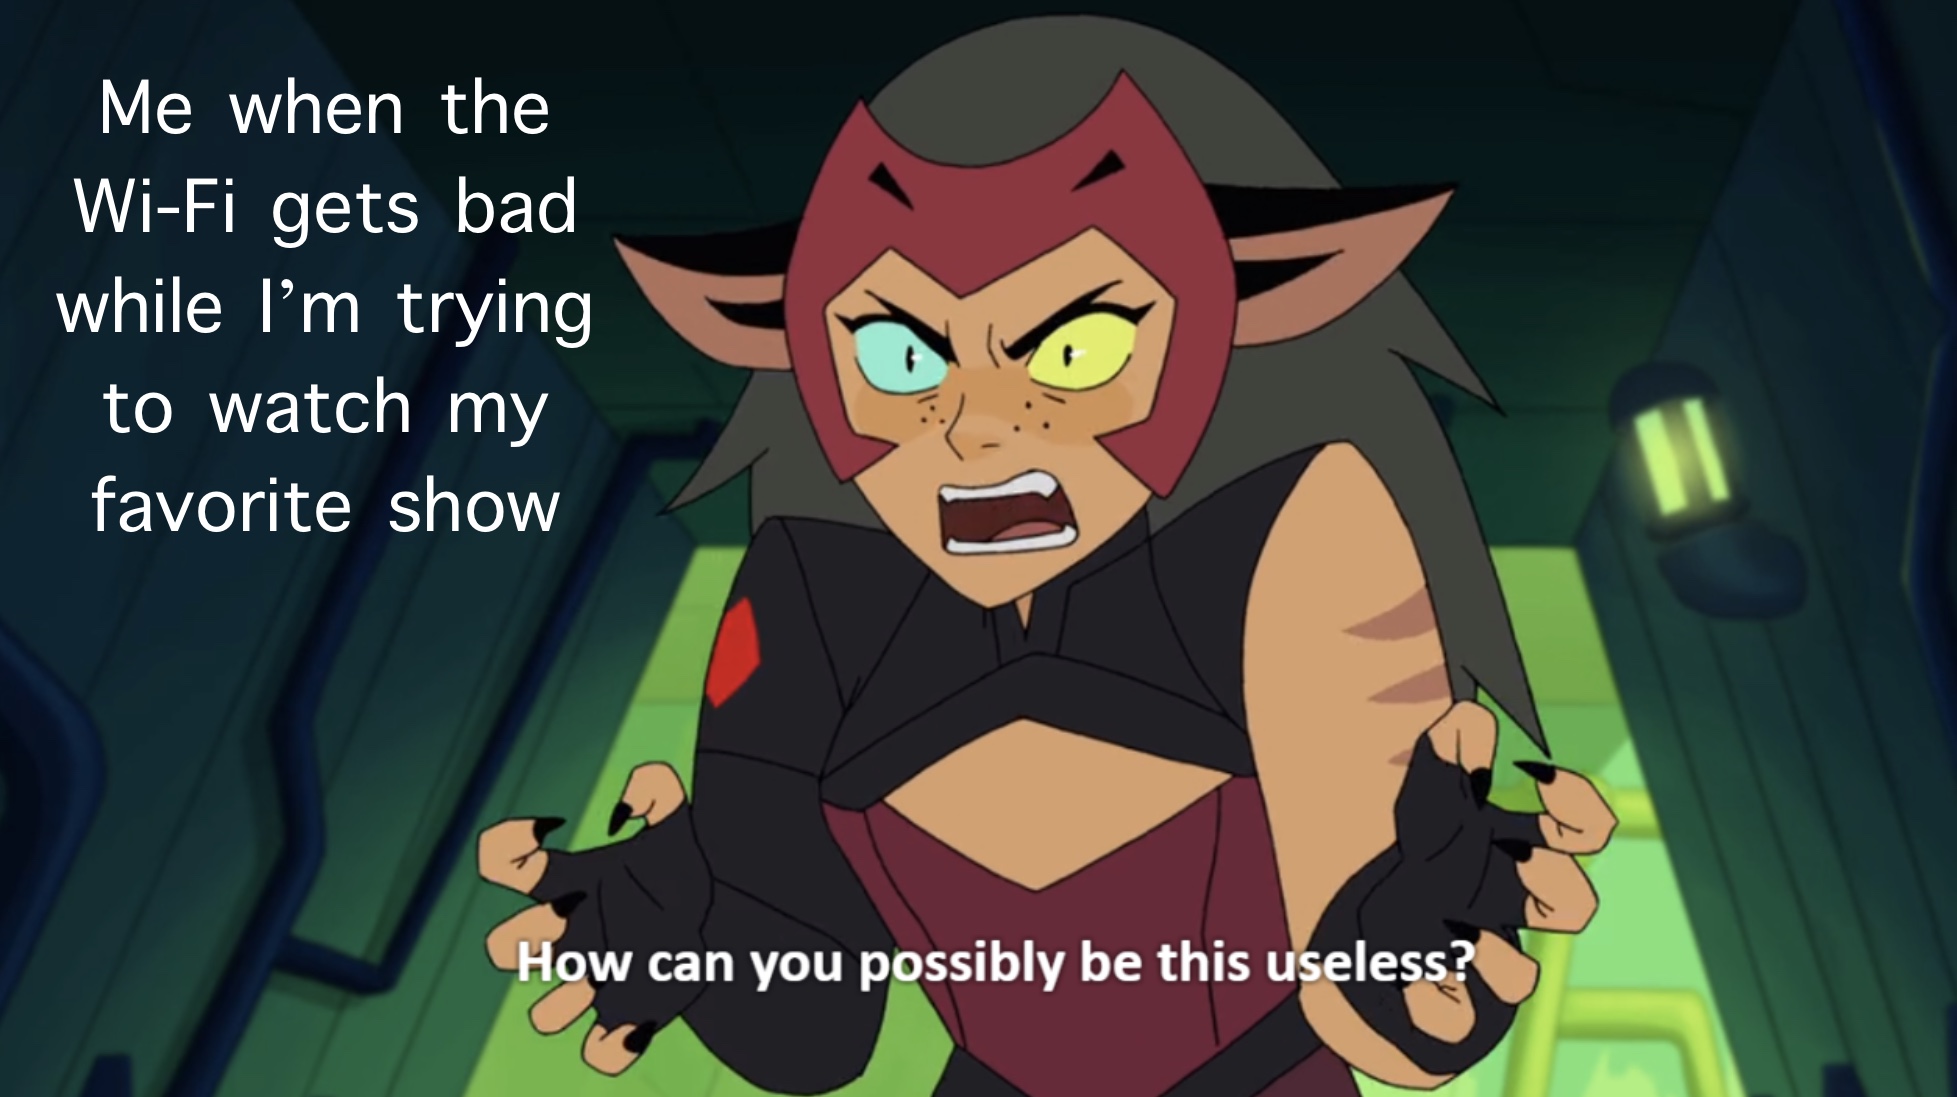 A handful of anime memes except I replaced the punchline with Catra getting  decked in the face by Frosta : r/OkBuddyCatra